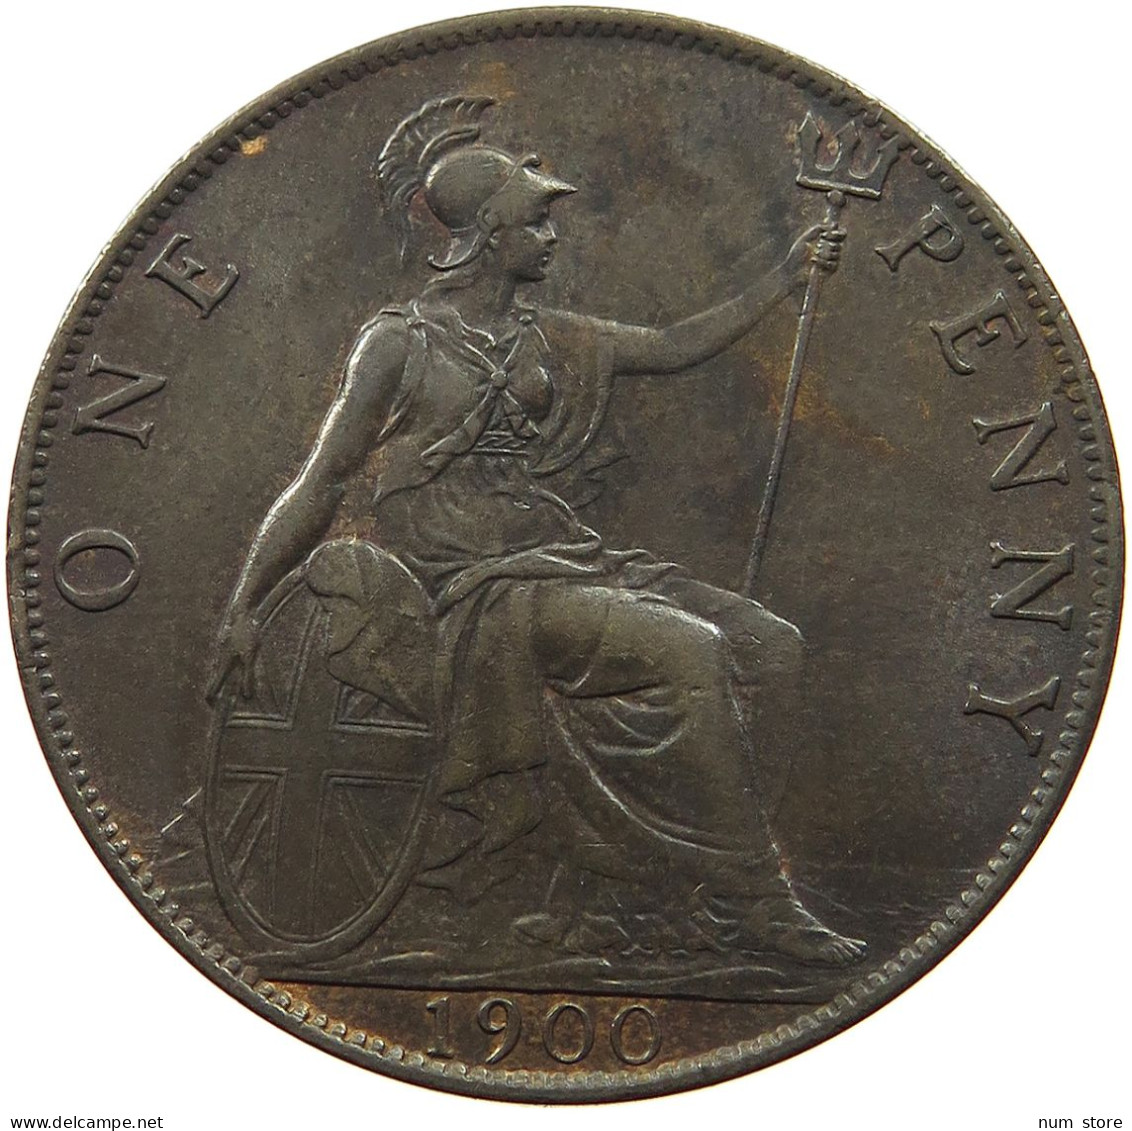 GREAT BRITAIN PENNY 1900 Victoria 1837-1901 #t067 0259 - D. 1 Penny